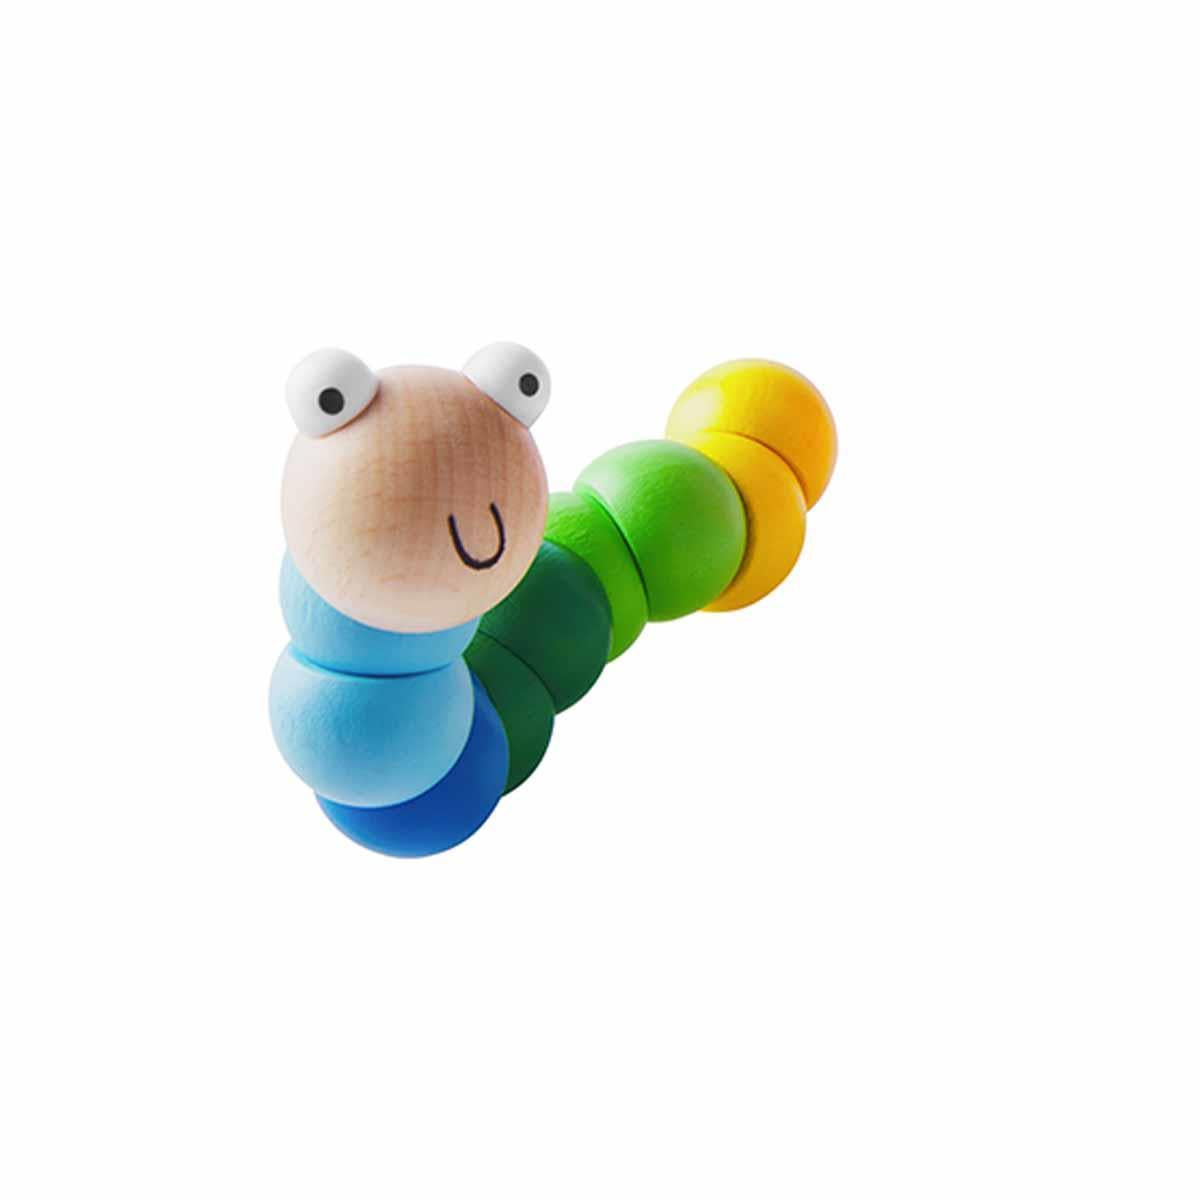 Wiggly Worm Toy